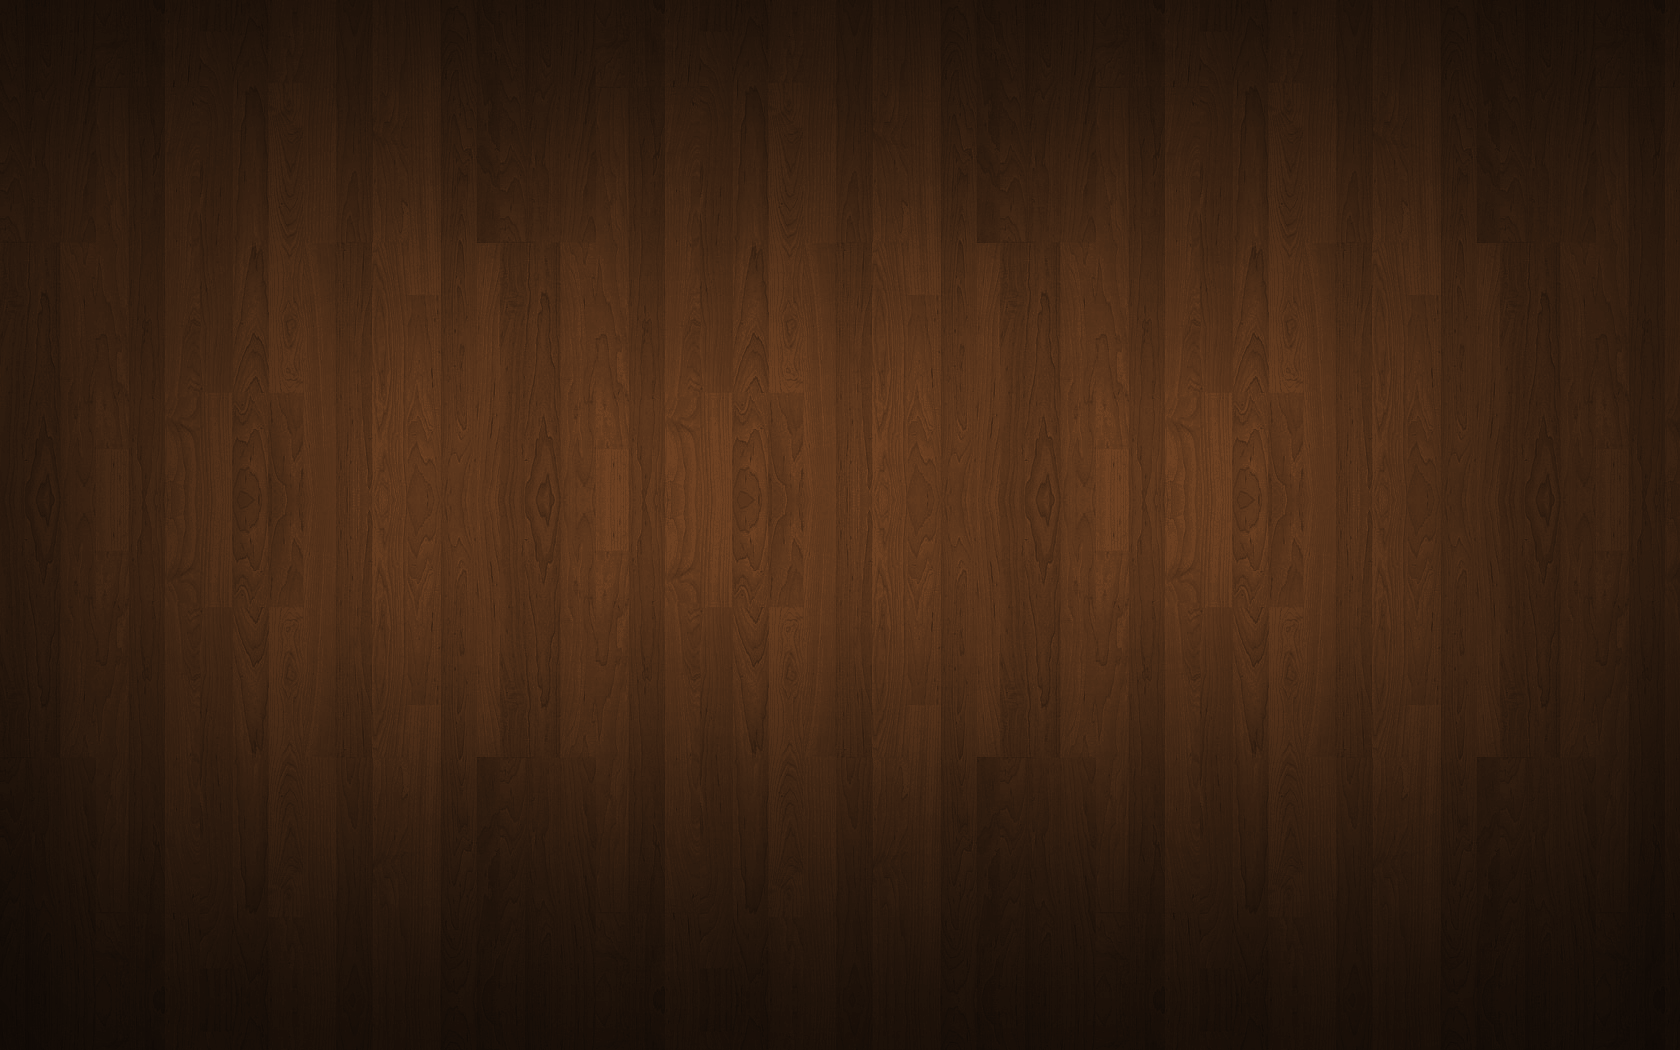 Abstract-Wood-Wallpaper-Dark-Image-Computer-Picture.png